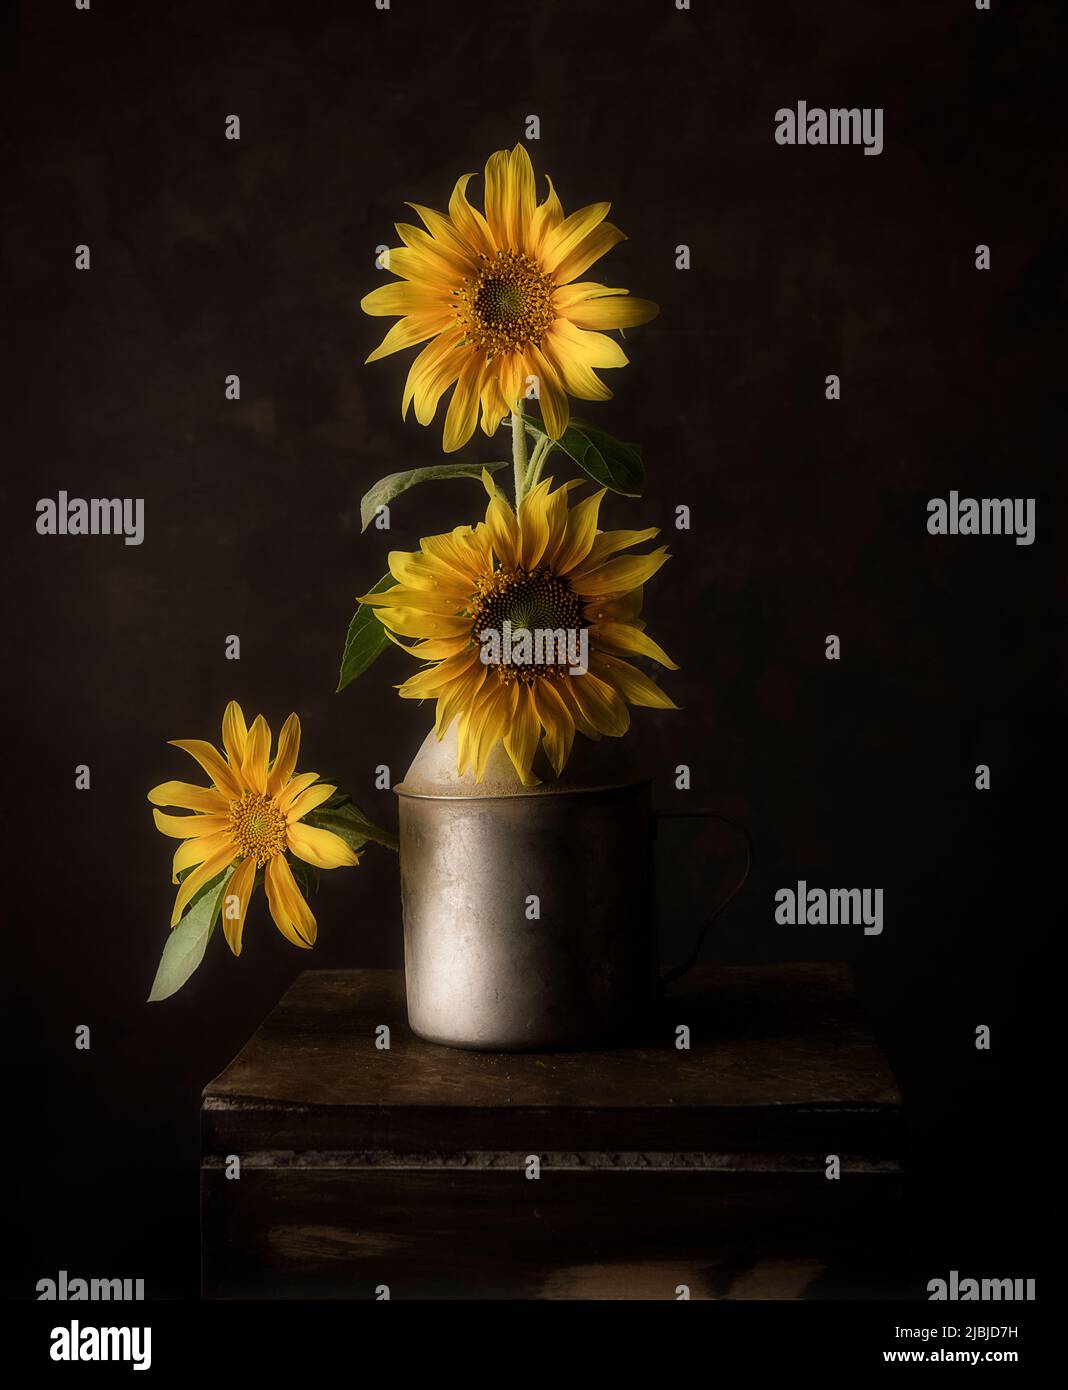 sunflower still life photography with old cun  ont top of samll wooden table Stock Photo